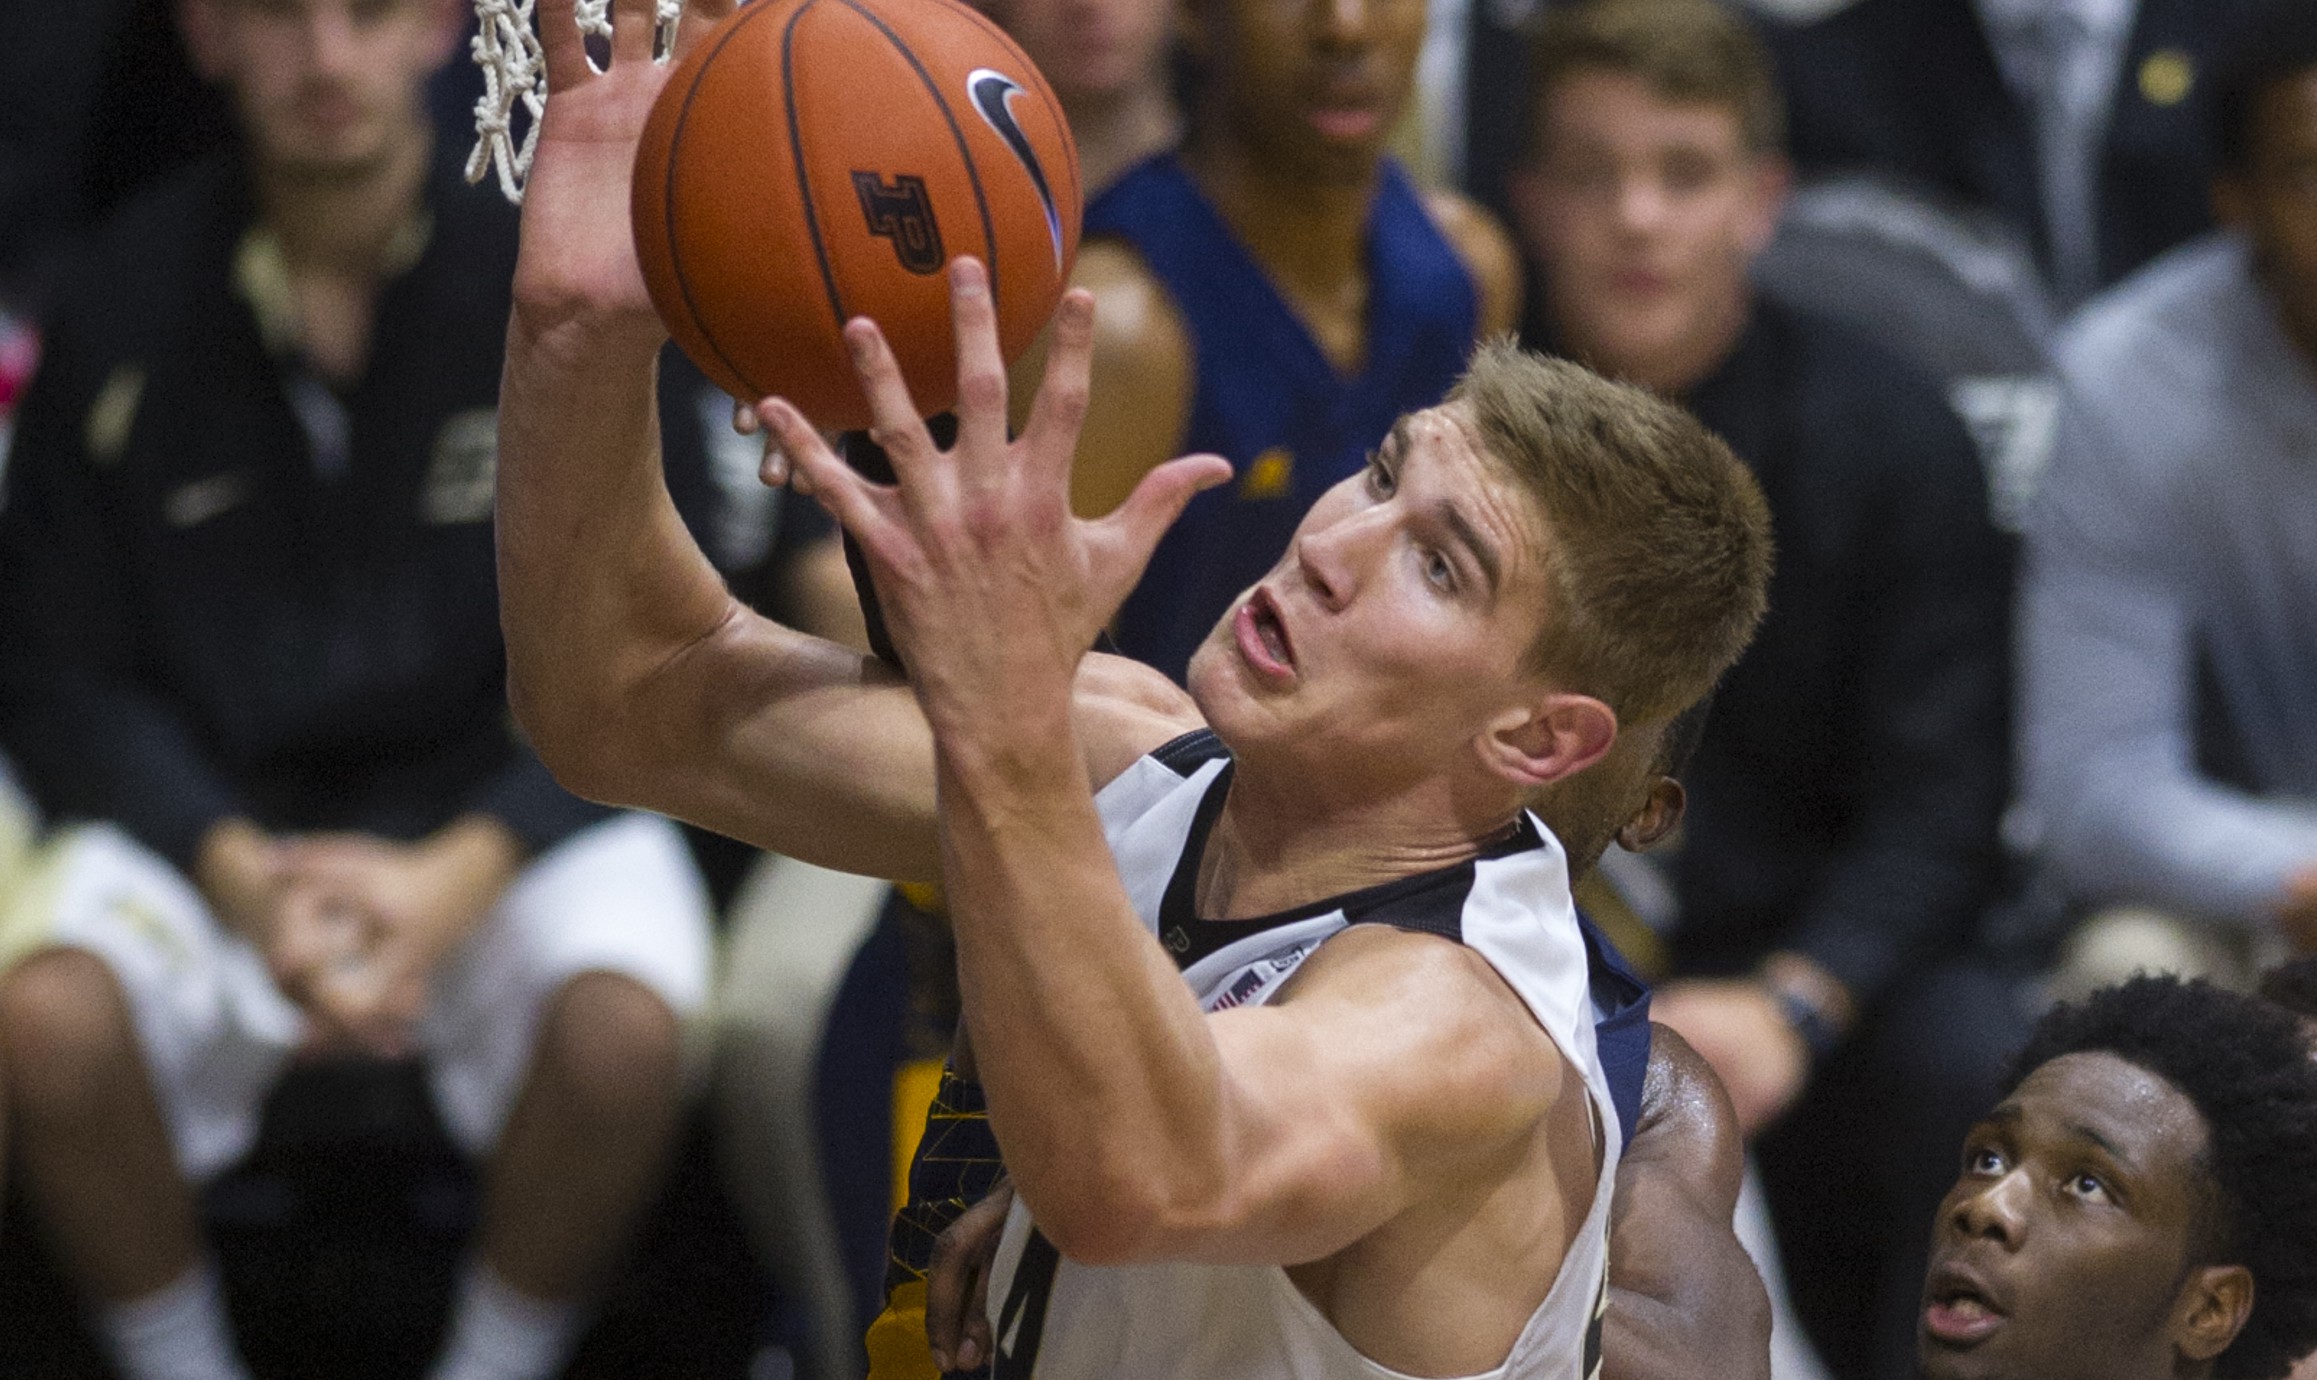 Purdue center Isaac Haas (44) goes after a rebound against North Carolina A&T during the second half of an NCAA college basketball game Friday, Nov. 13, 2015, in West Lafayette, Ind. Purdue won 81-40. (AP Photo/Doug McSchooler)